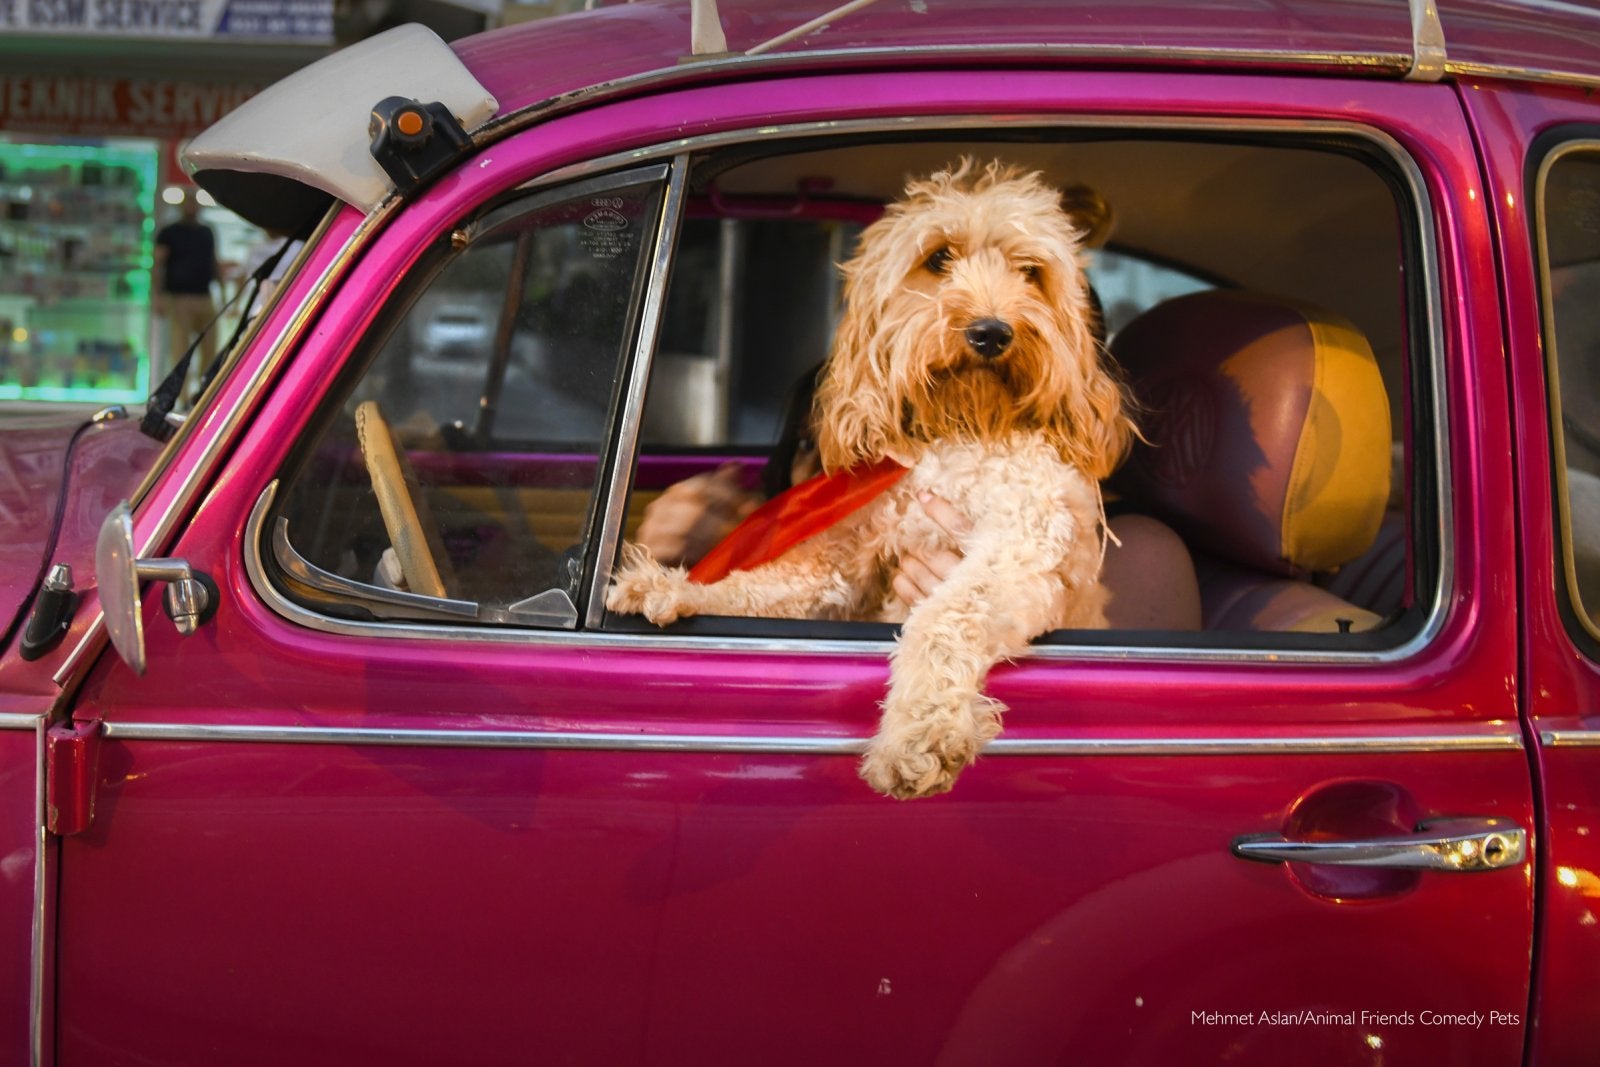 A dog sitting in the drivers' seat of a car.